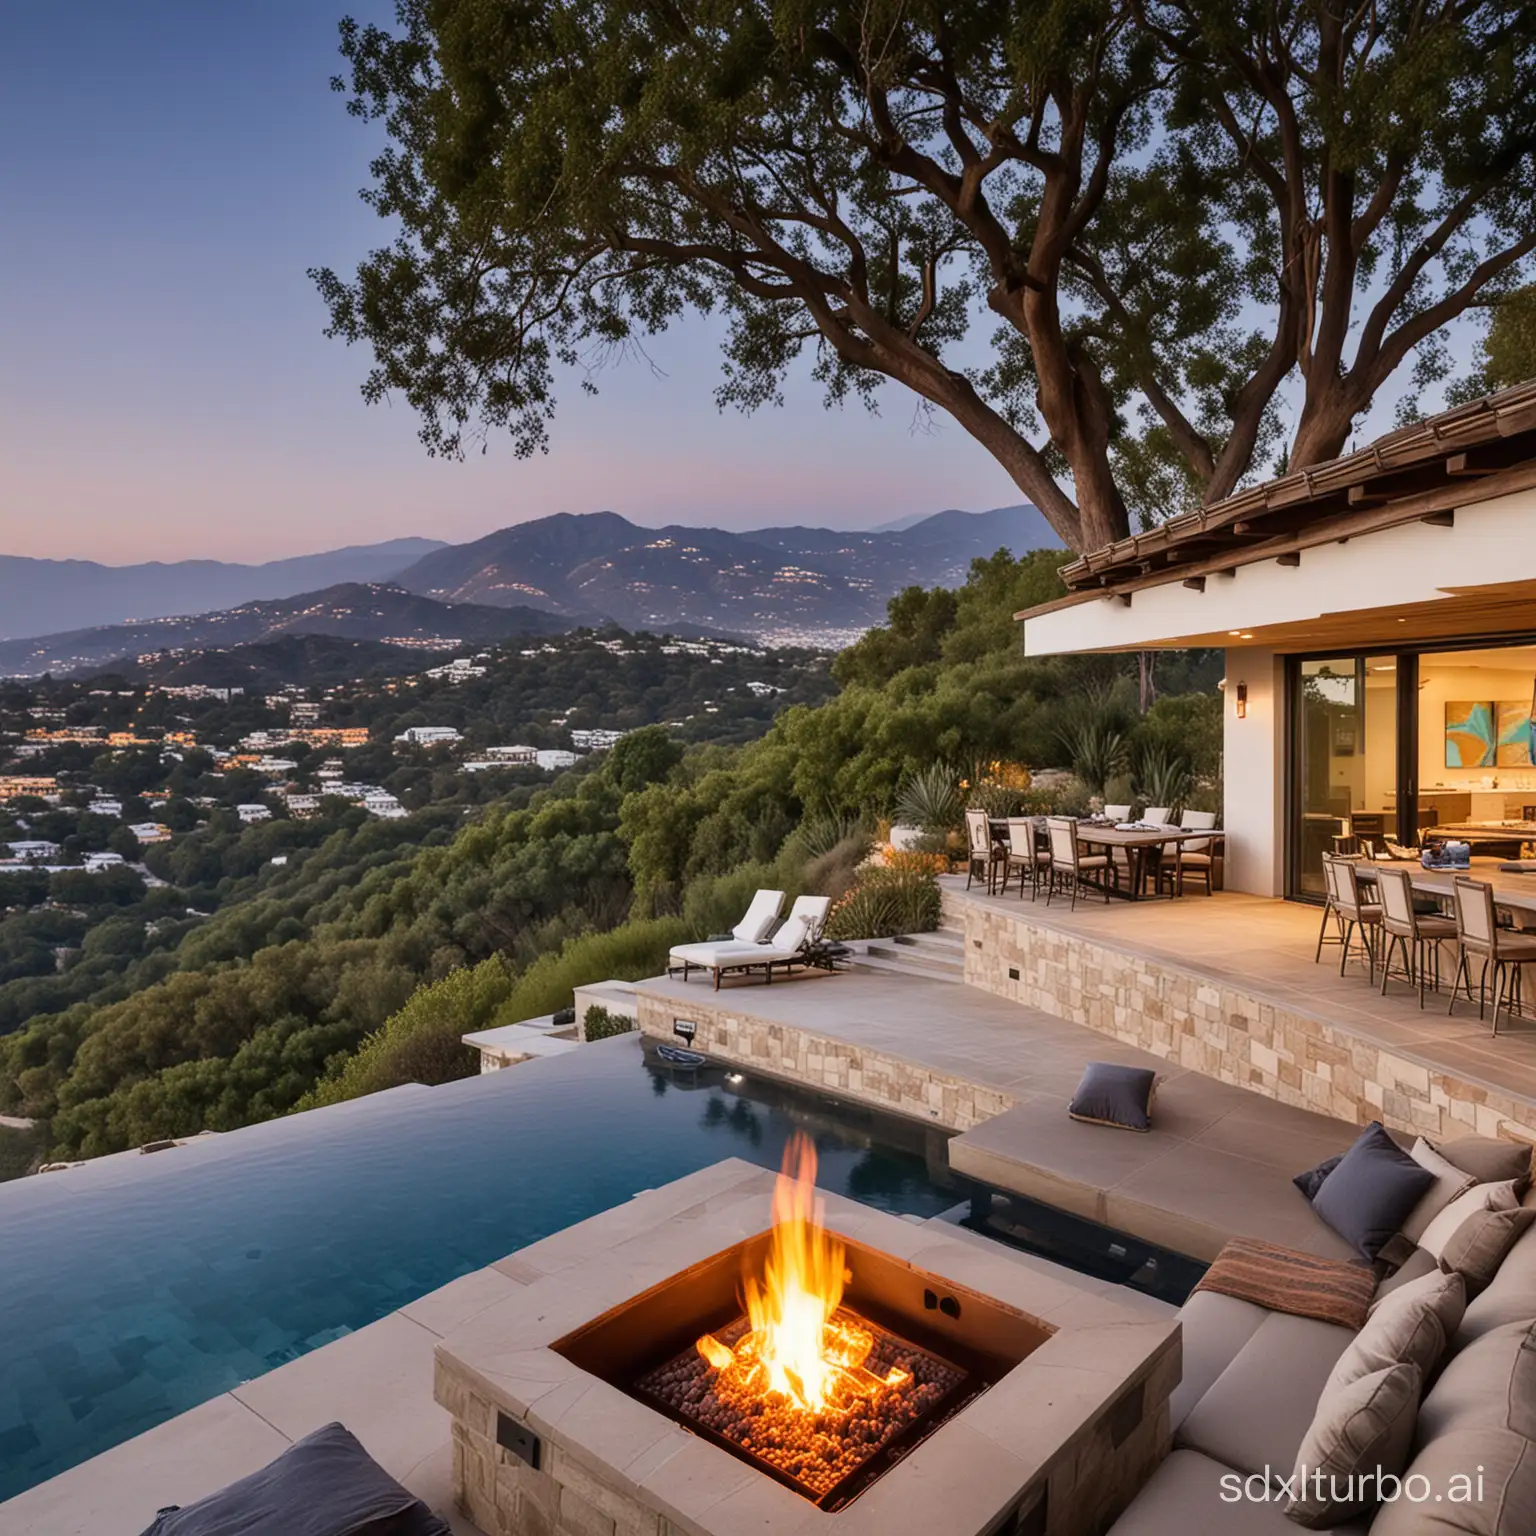 outdoor infinity pool looking over Santa Monica mountains. next to is below ground firepit with seating and behind is a covered outdoor kitchen and dining area